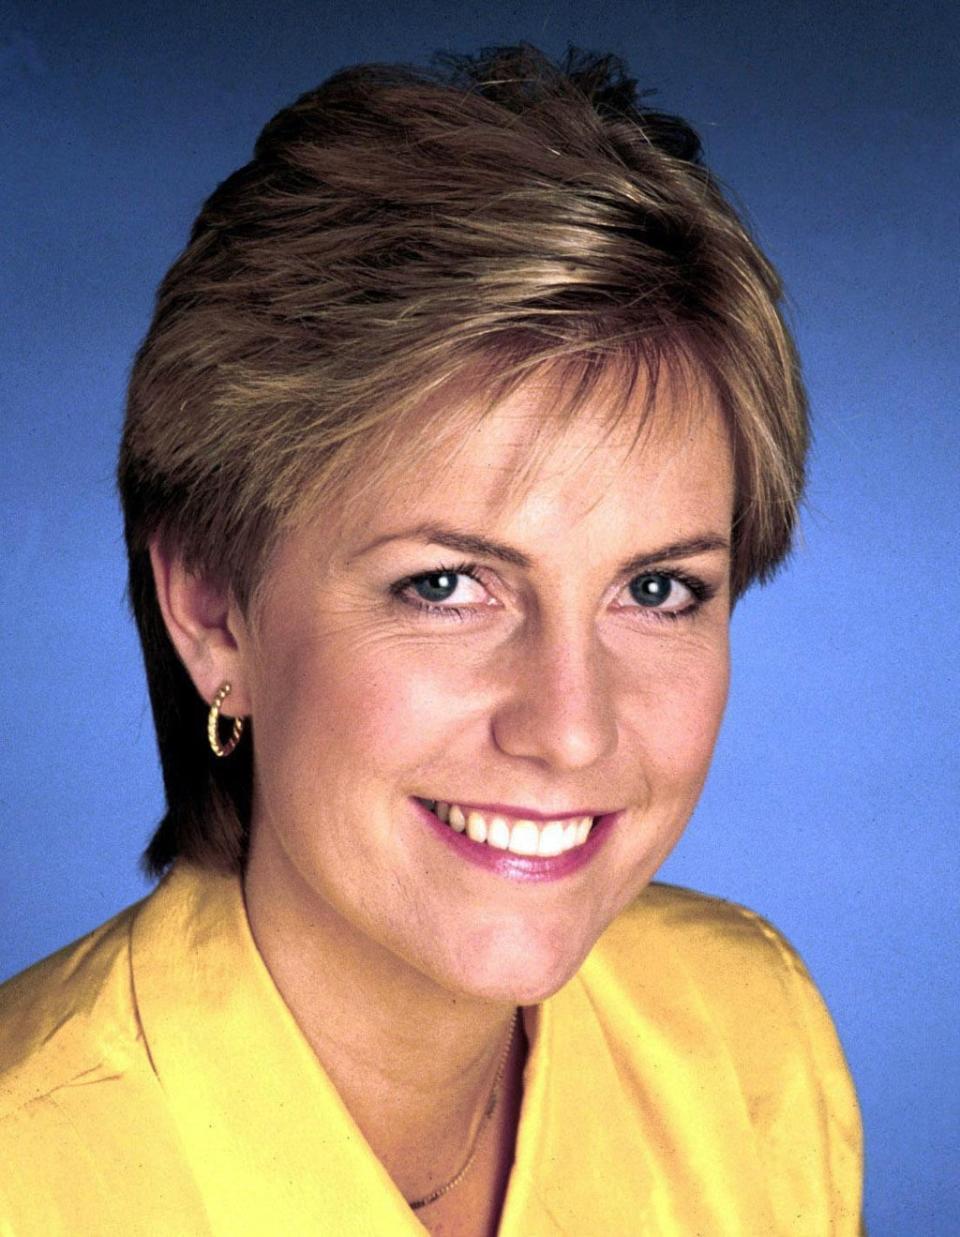 Nick Ross helped inspire an institute of crime science in memory of his co-presenter Jill Dando, who was murdered outside her London home (BBC/PA) (PA Media)